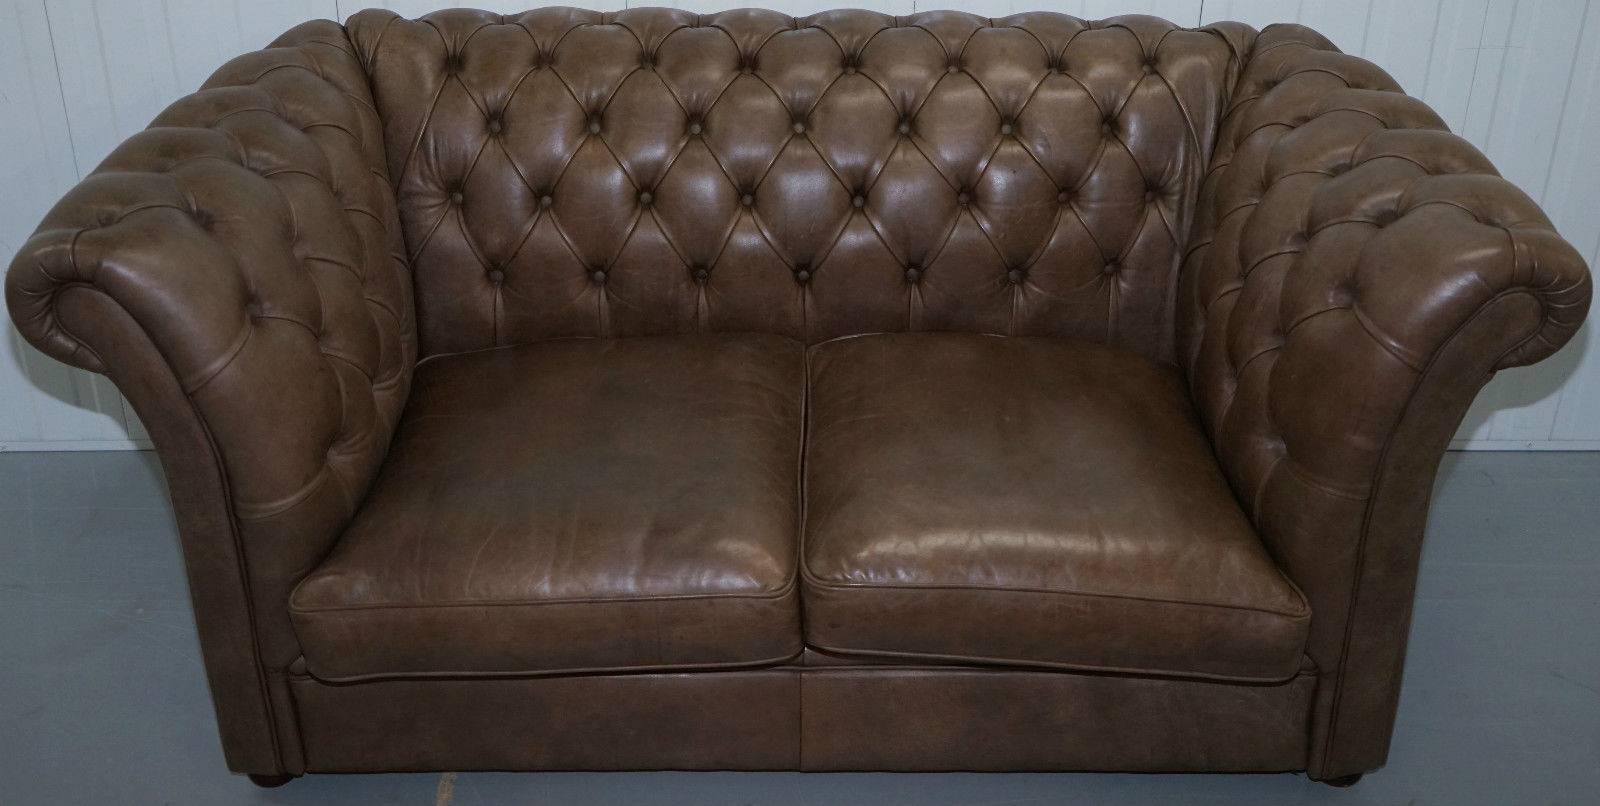 We are delighted to offer for sale this very rare custom-made to order RRP £3800 Chesterfield club sofa

This is around 30cm taller than your standard club sofa, it is truly stunning, very grand and in the world of Tesco copied club sofas and a